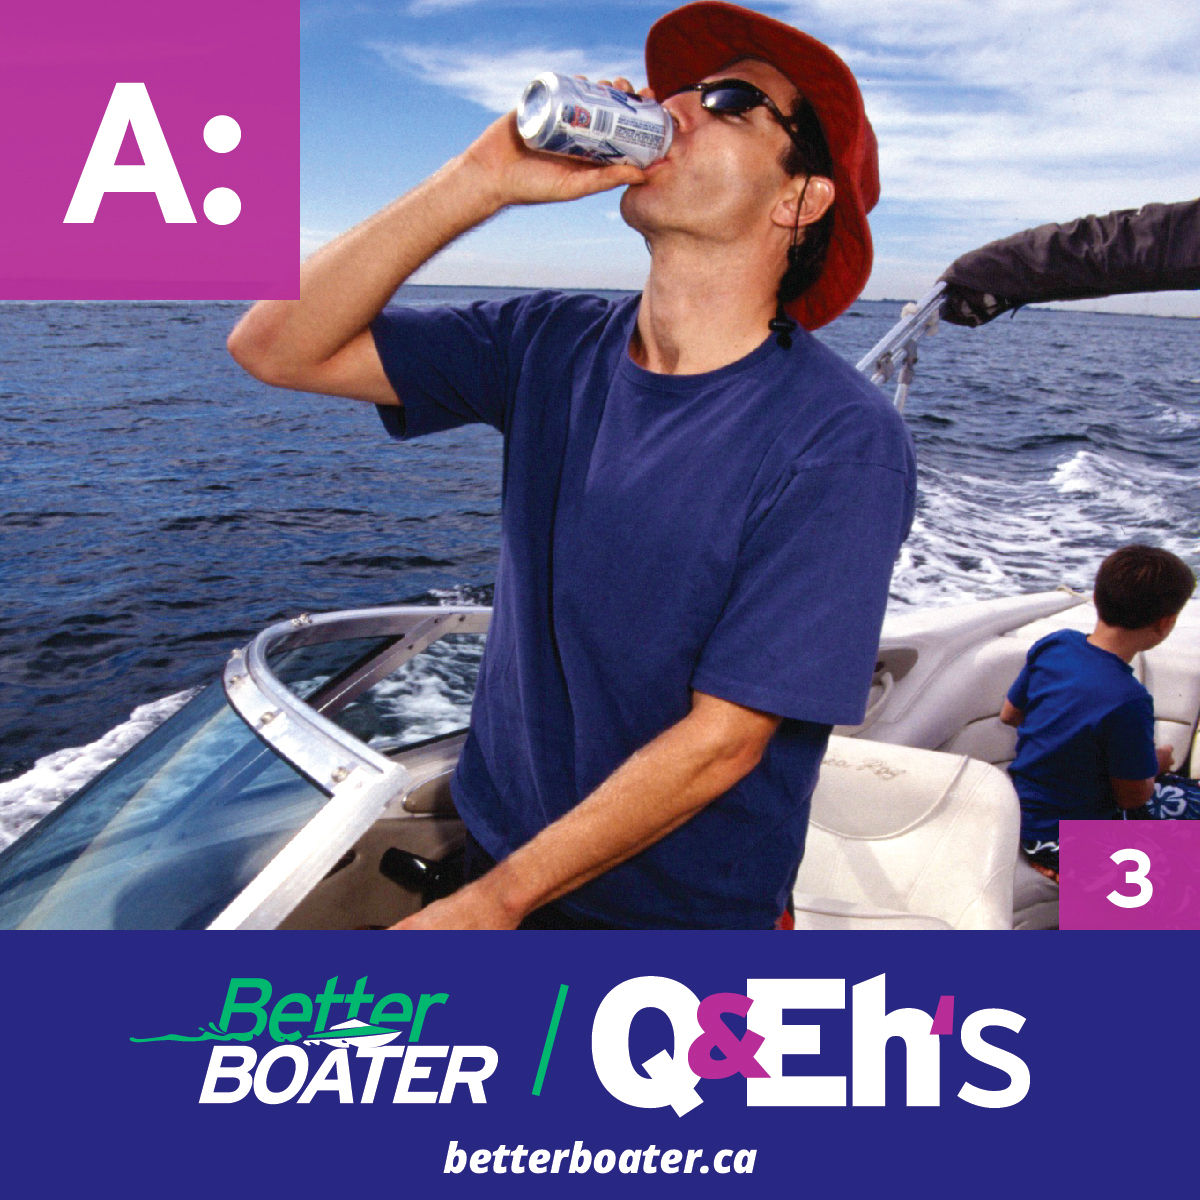 https://betterboater.ca/Lose%20Licence